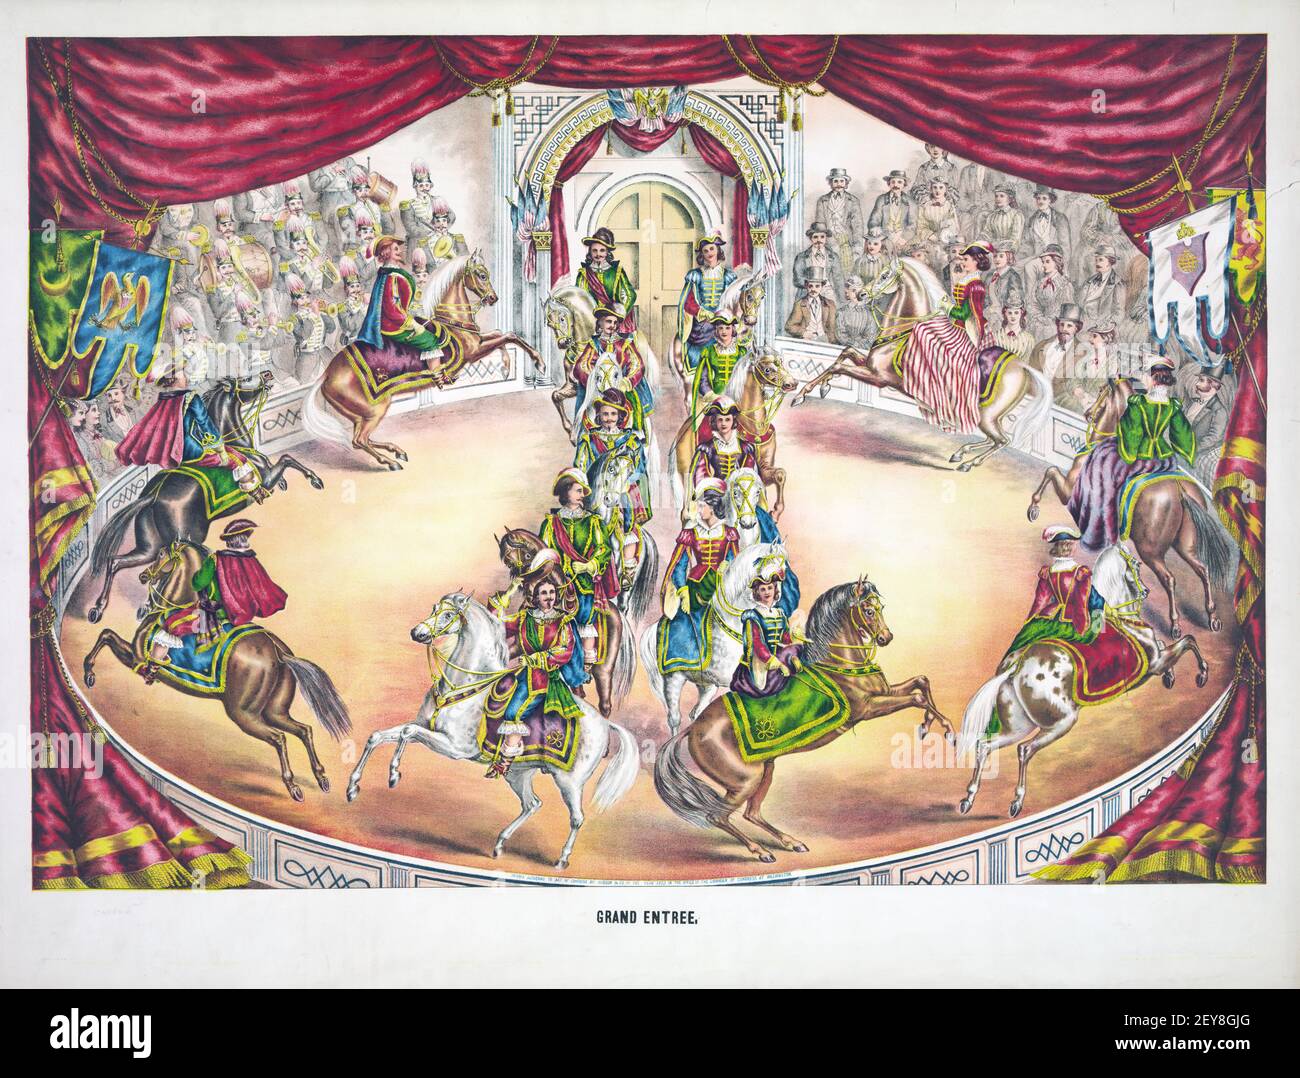 Grand Entree. Classic Circus Poster, old and vintage style. 1873. Lithograph by Gibson & Co. Circus performers. Stock Photo